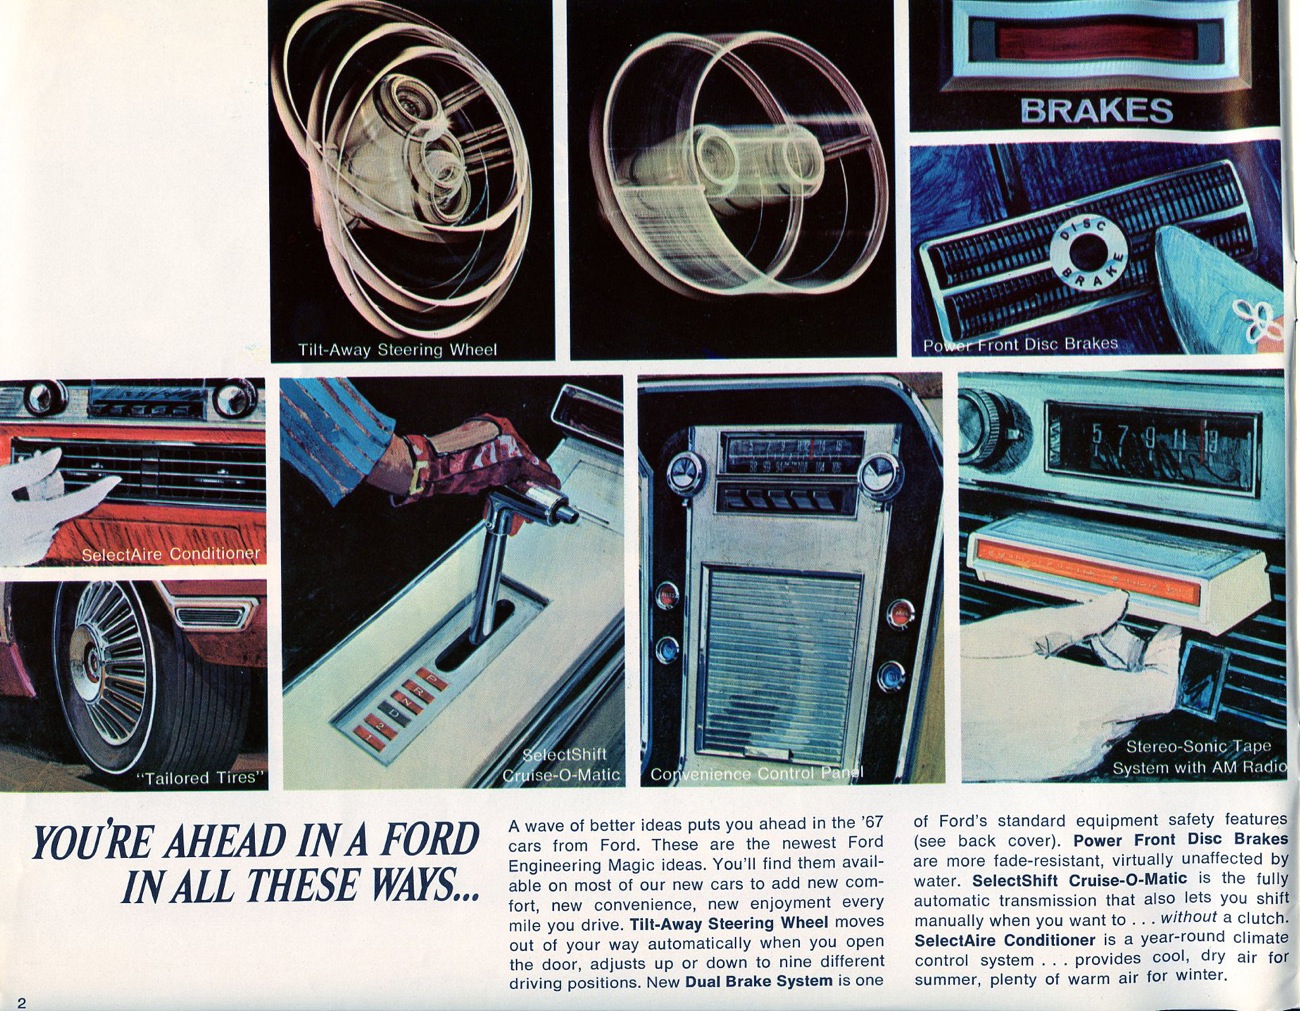 1967 Ford Full-Line Brochure Page 4